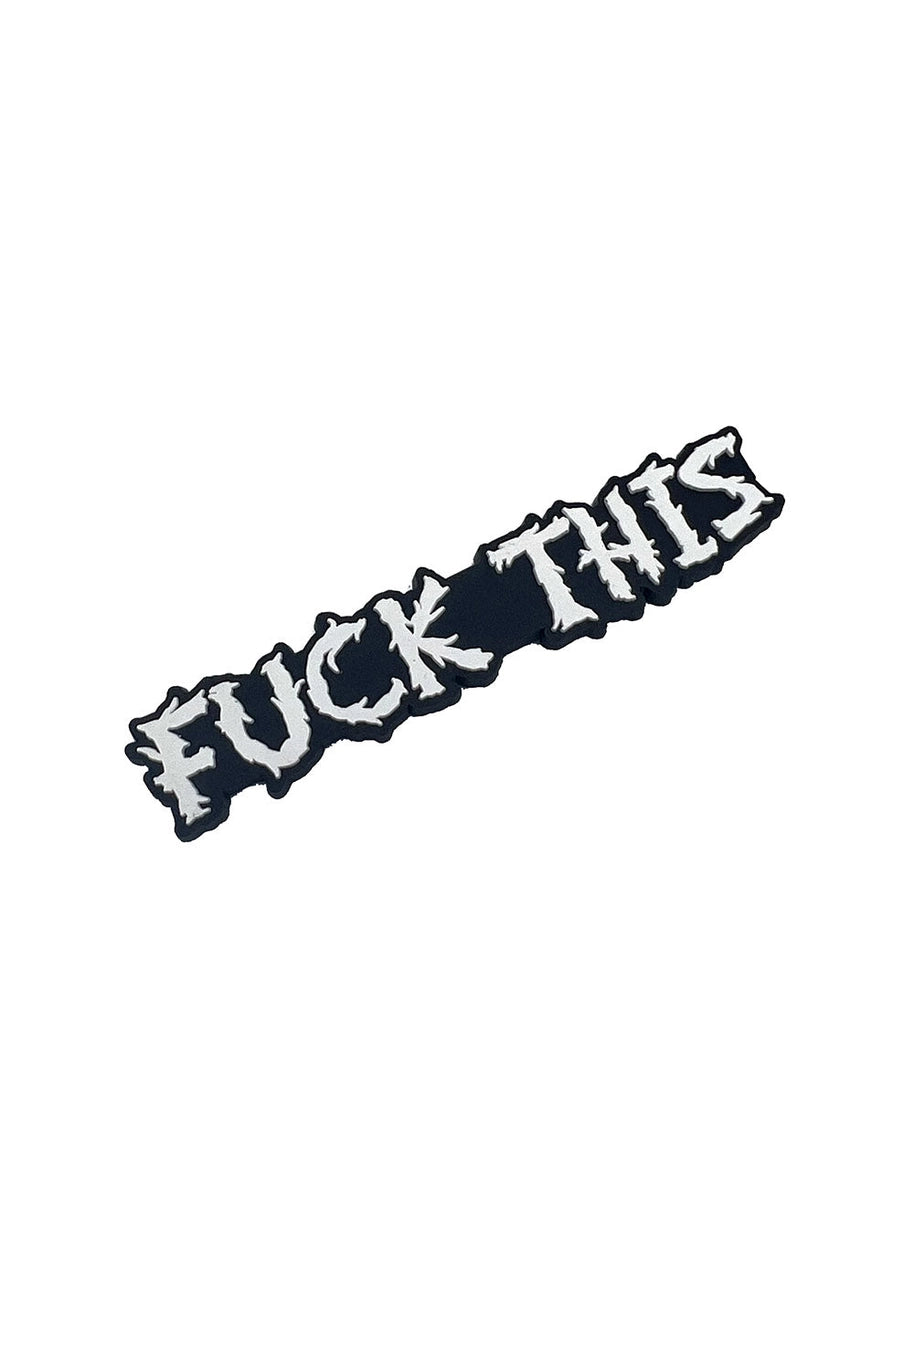 “FUCK THIS” soft touch black and white rubber magnet in a barbed wire style font